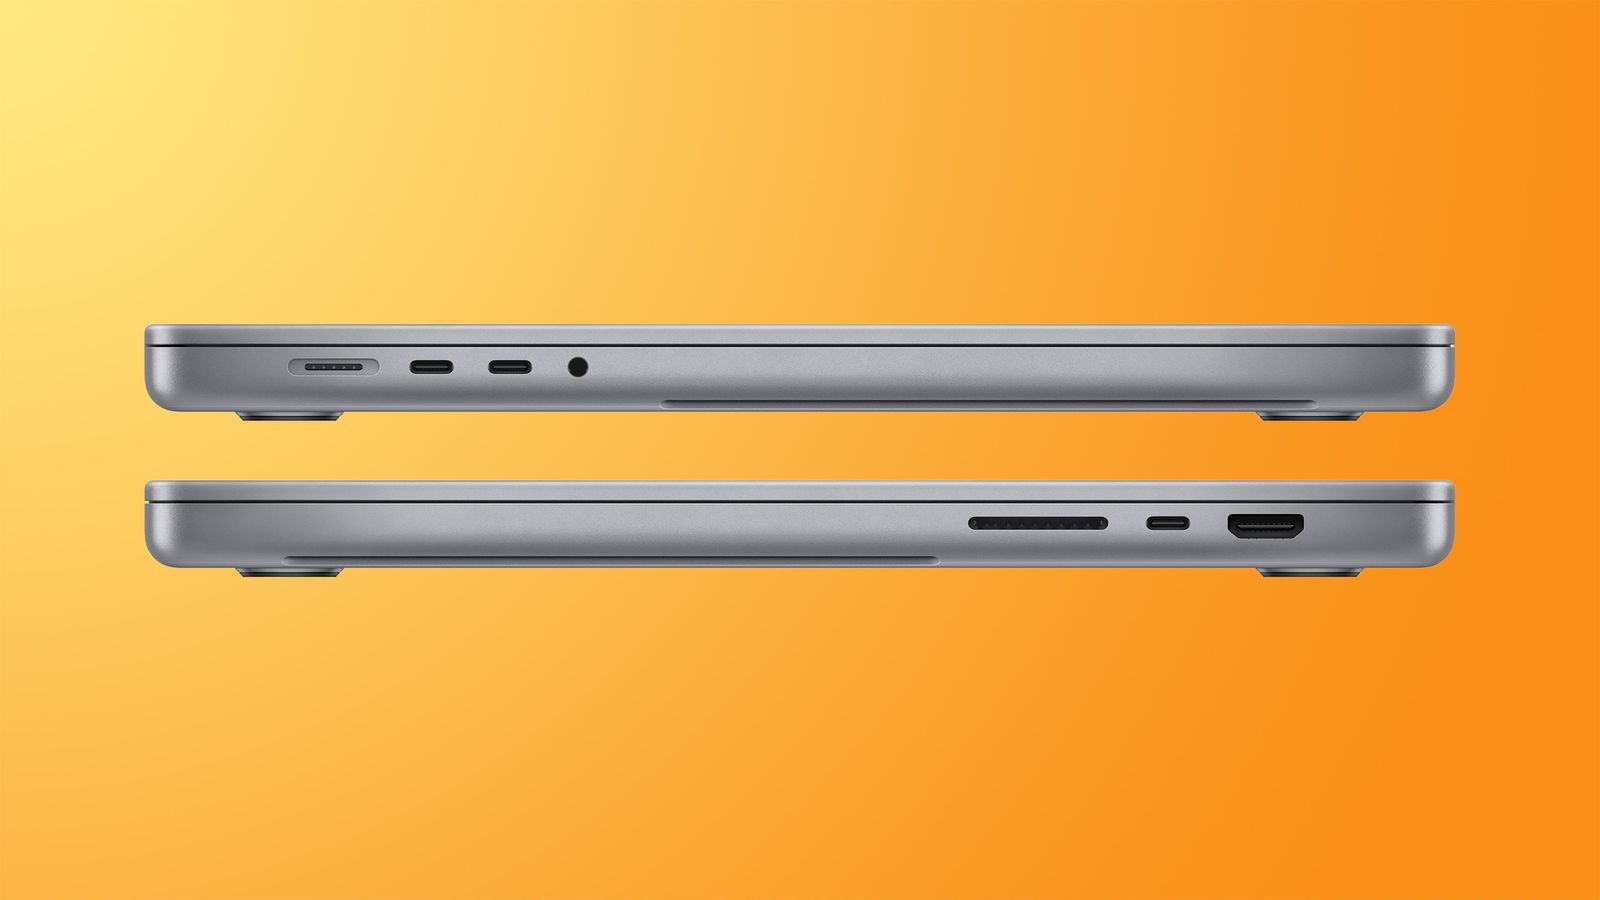 New 16-Inch MacBook Pro is Thicker and Heavier Than Previous